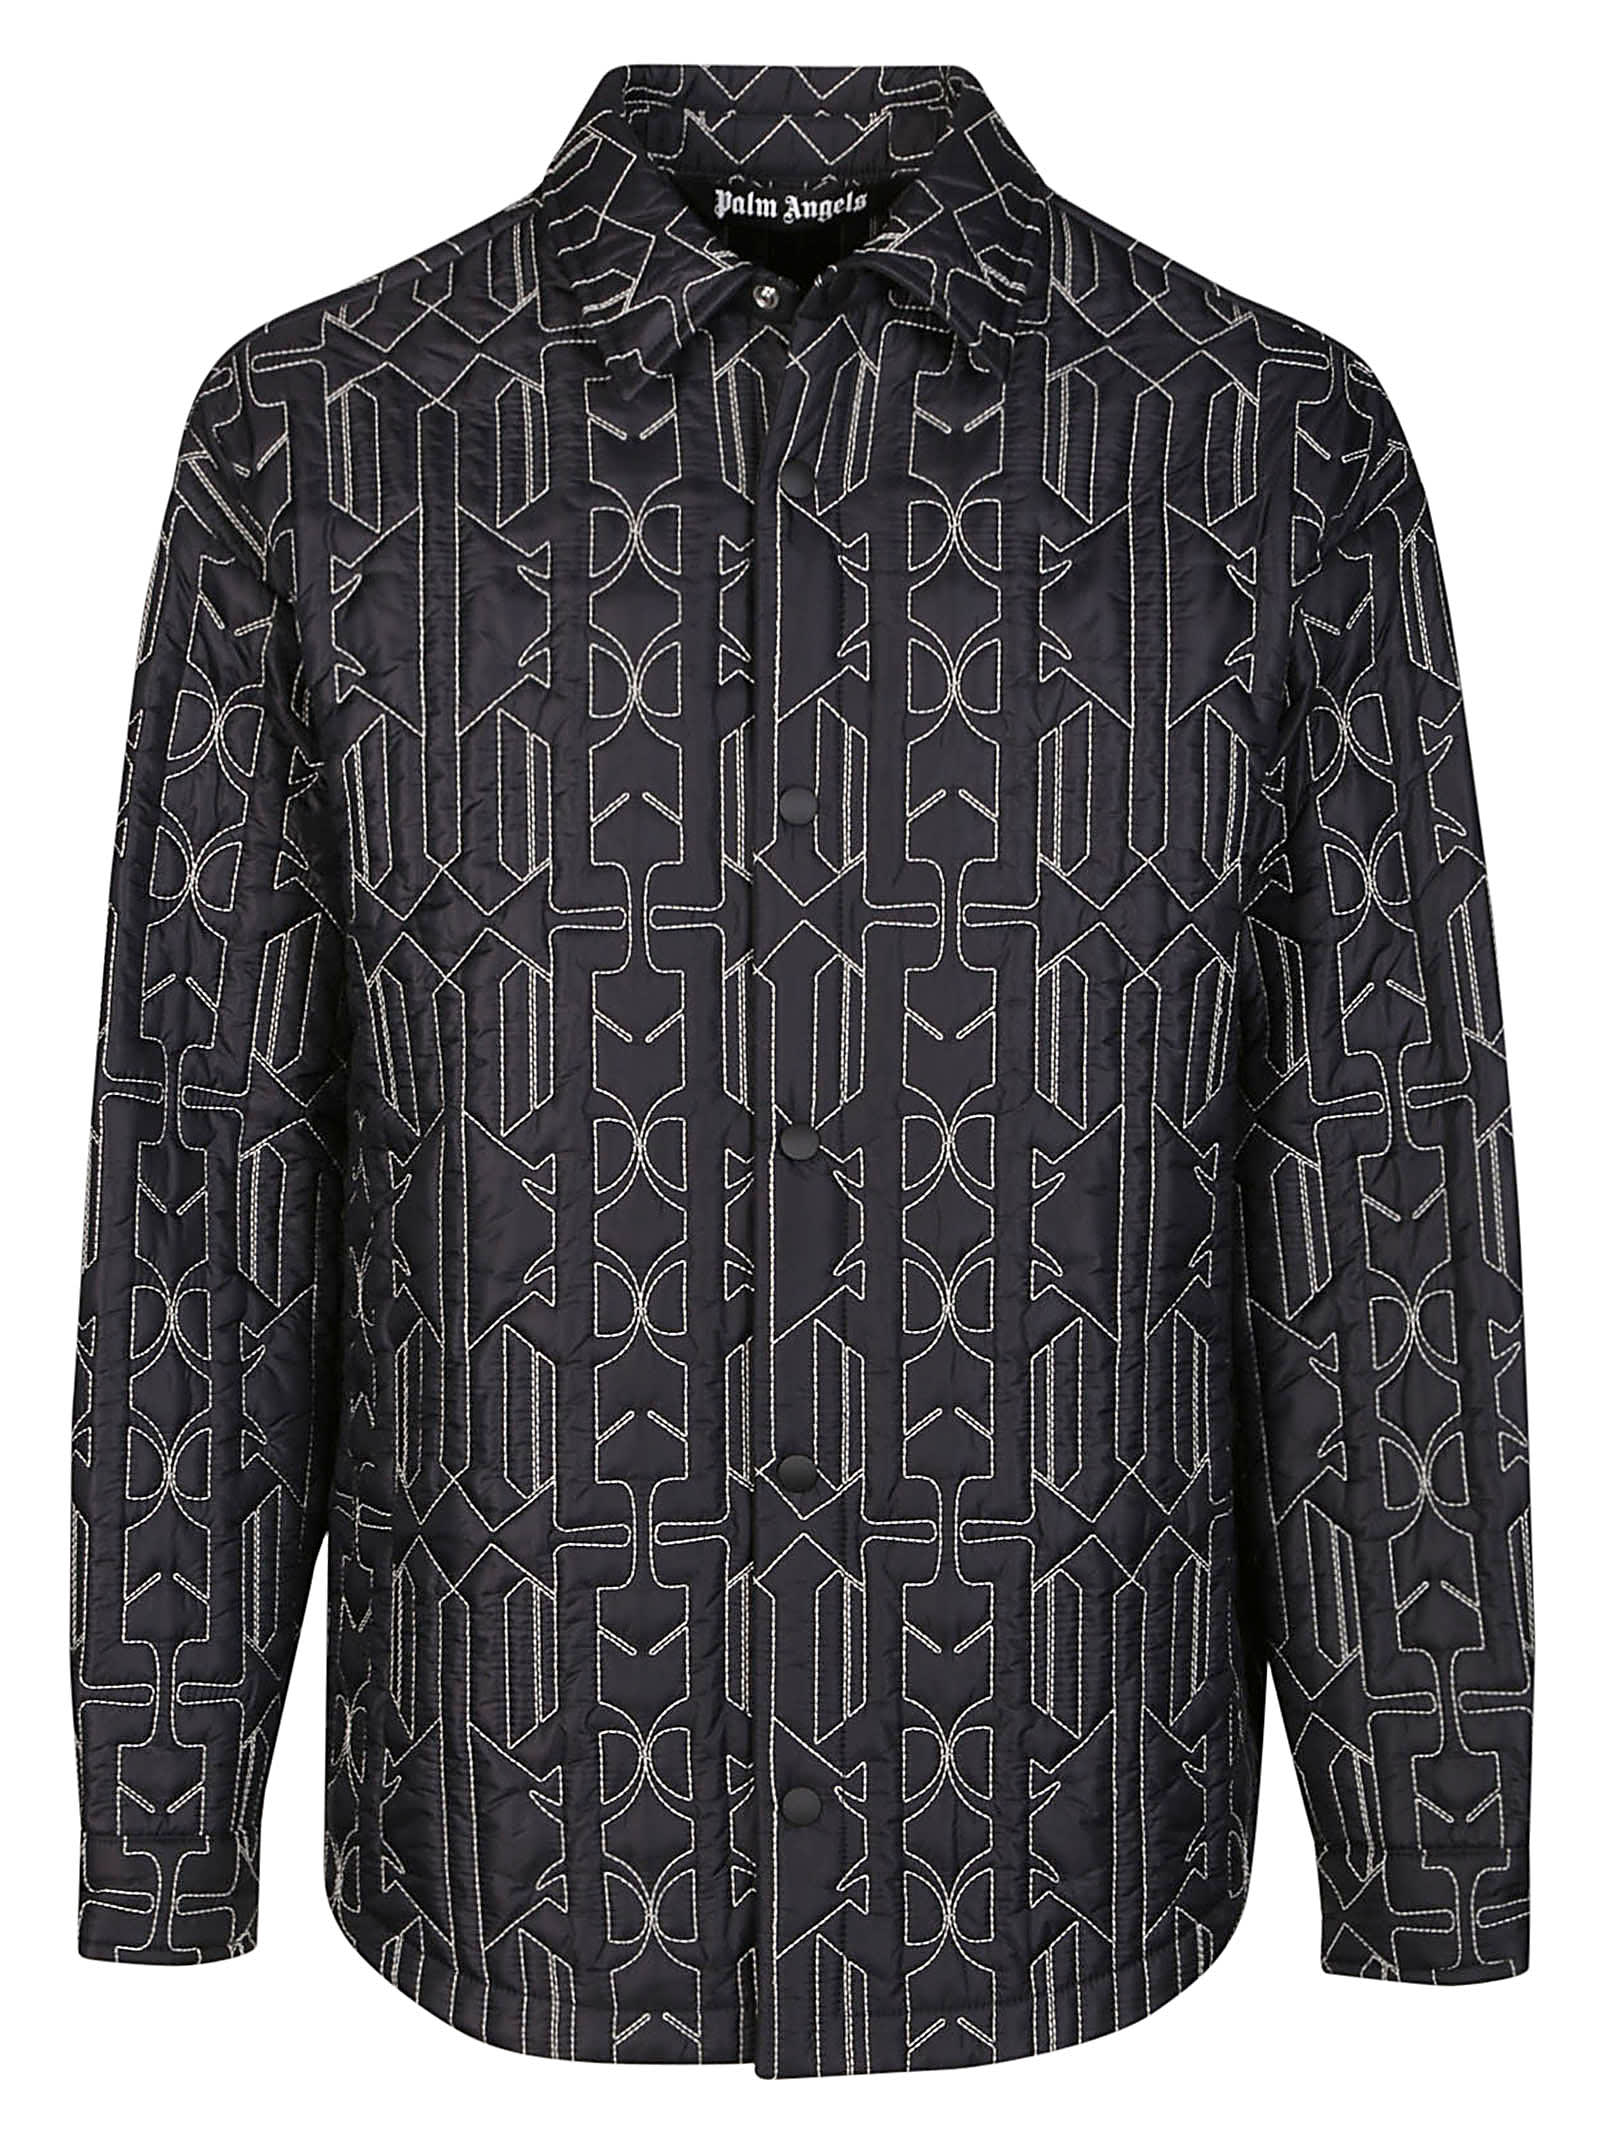 PALM ANGELS ALL MONOGRAM QUILTED LONG SLEEVE OVERSHIRT